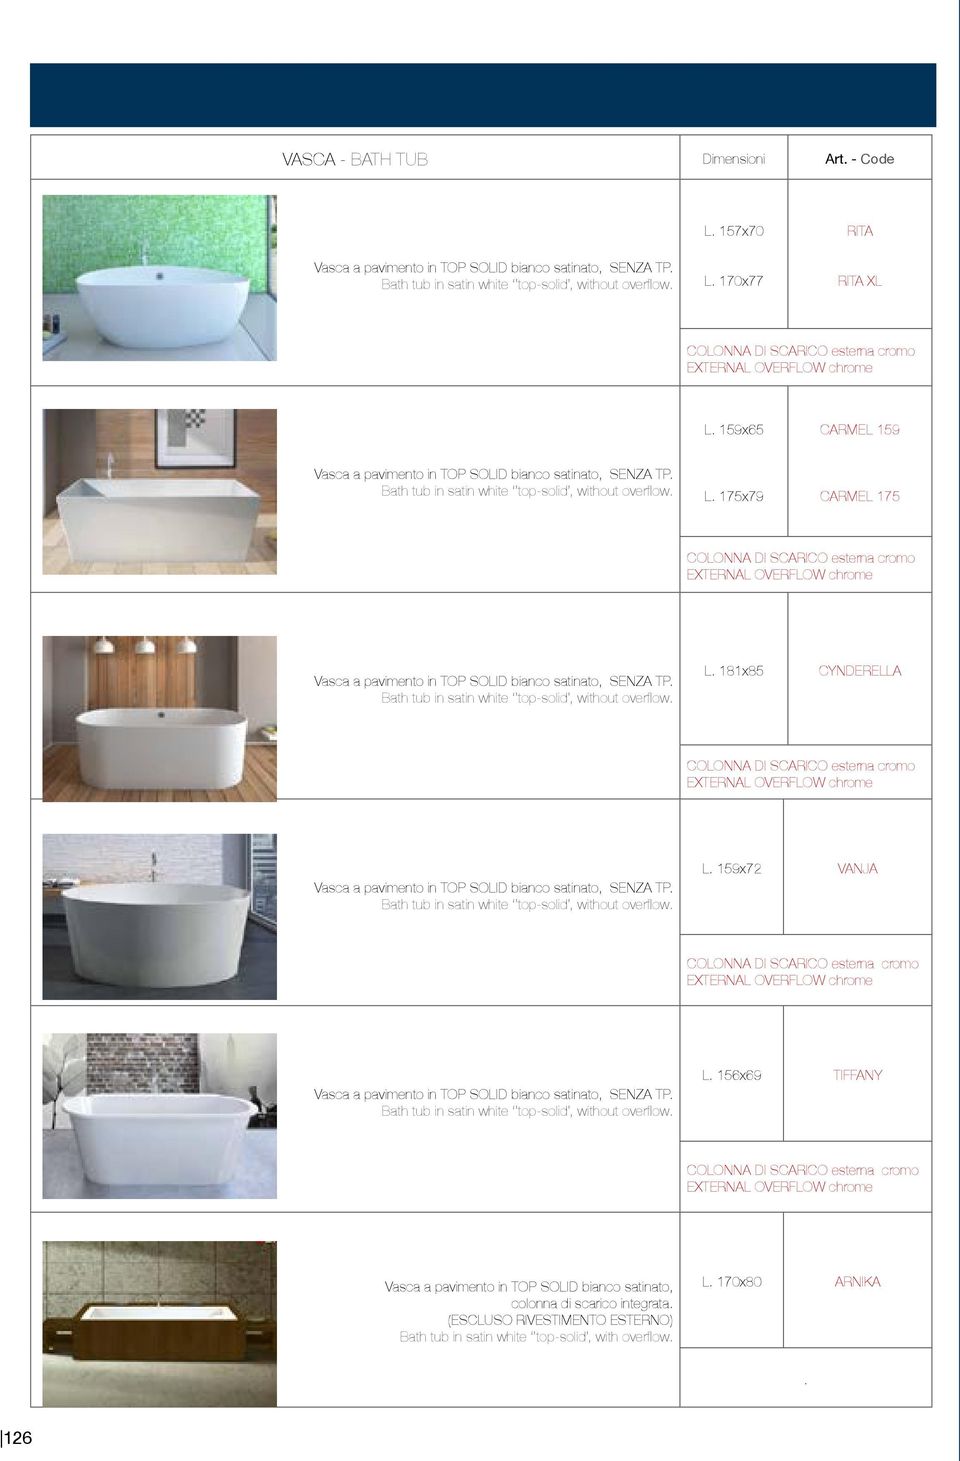 Bath tub in satin white top-solid, without overflow. L. 175x79 CARMEL 175 COLONNA DI SCARICO esterna cromo EXTERNAL OVERFLOW chrome Vasca a pavimento in TOP SOLID bianco satinato, SENZA TP.